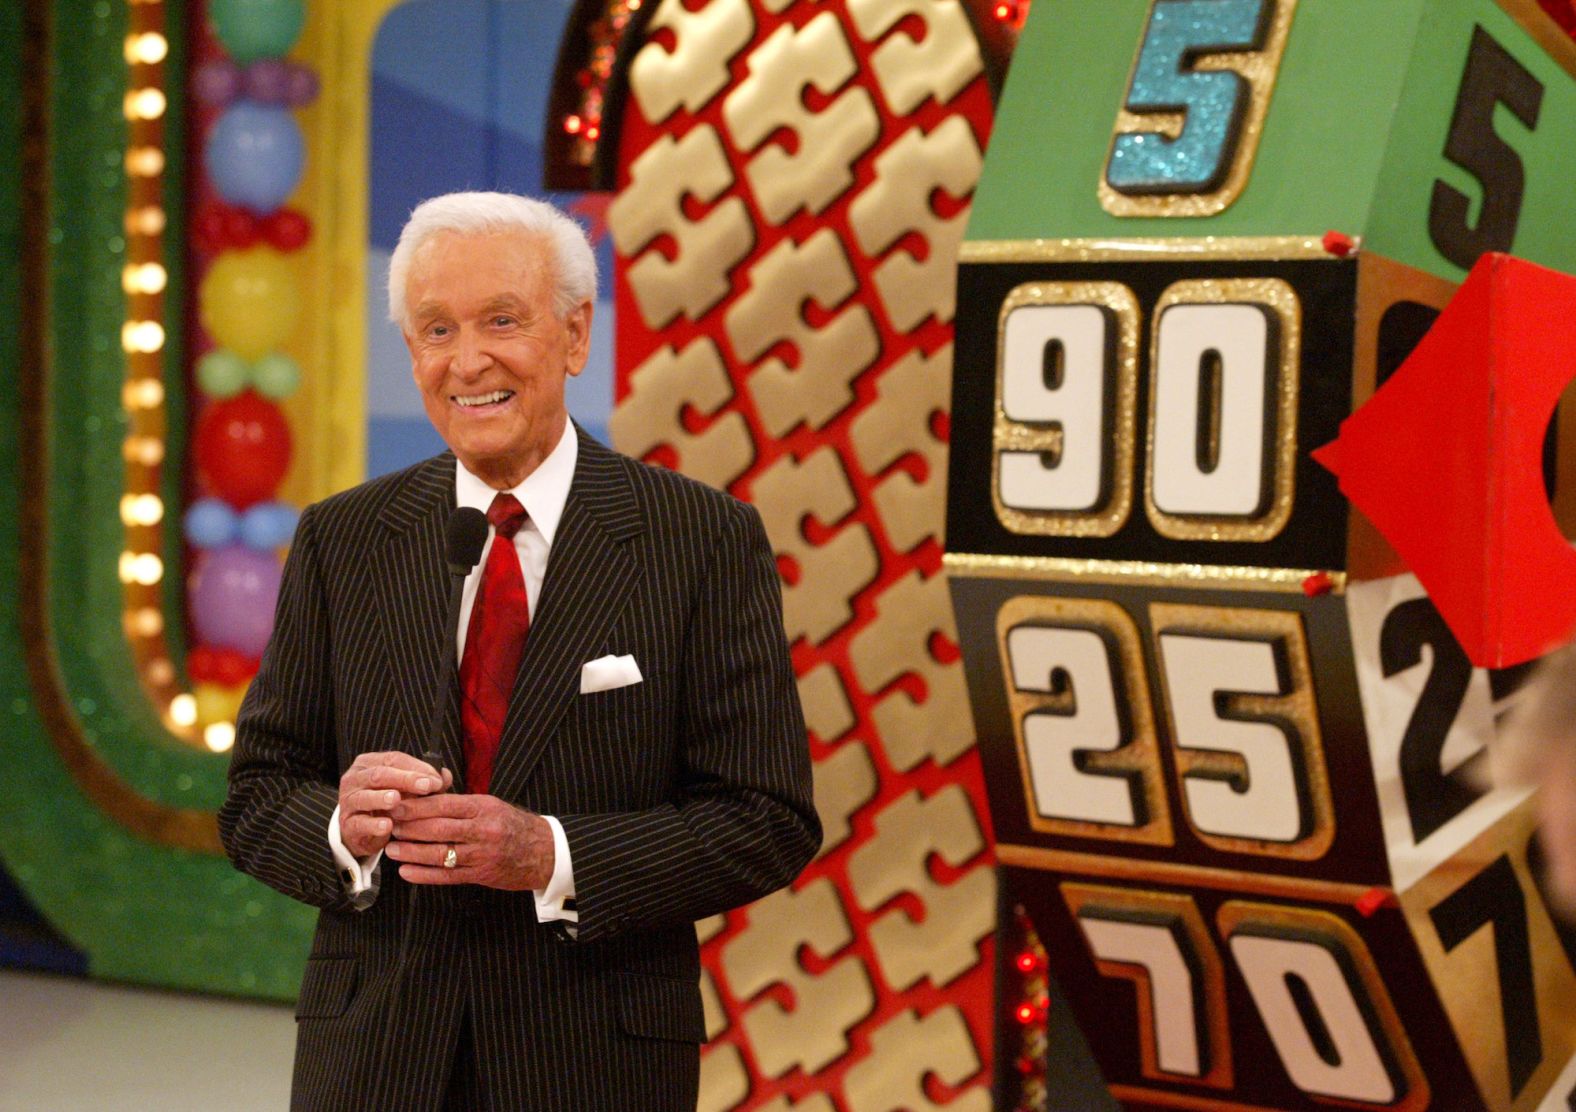 <a href="index.php?page=&url=https%3A%2F%2Fwww.cnn.com%2F2023%2F08%2F26%2Fentertainment%2Fbob-barker-death%2Findex.html" target="_blank">Bob Barker</a>, the "Price Is Right" host whose silky-smooth command, impish sense of humor and advocacy for animal welfare issues made him a beloved fixture on television for more than 35 years, died at the age of 99, his representative Roger Neal confirmed on August 26.